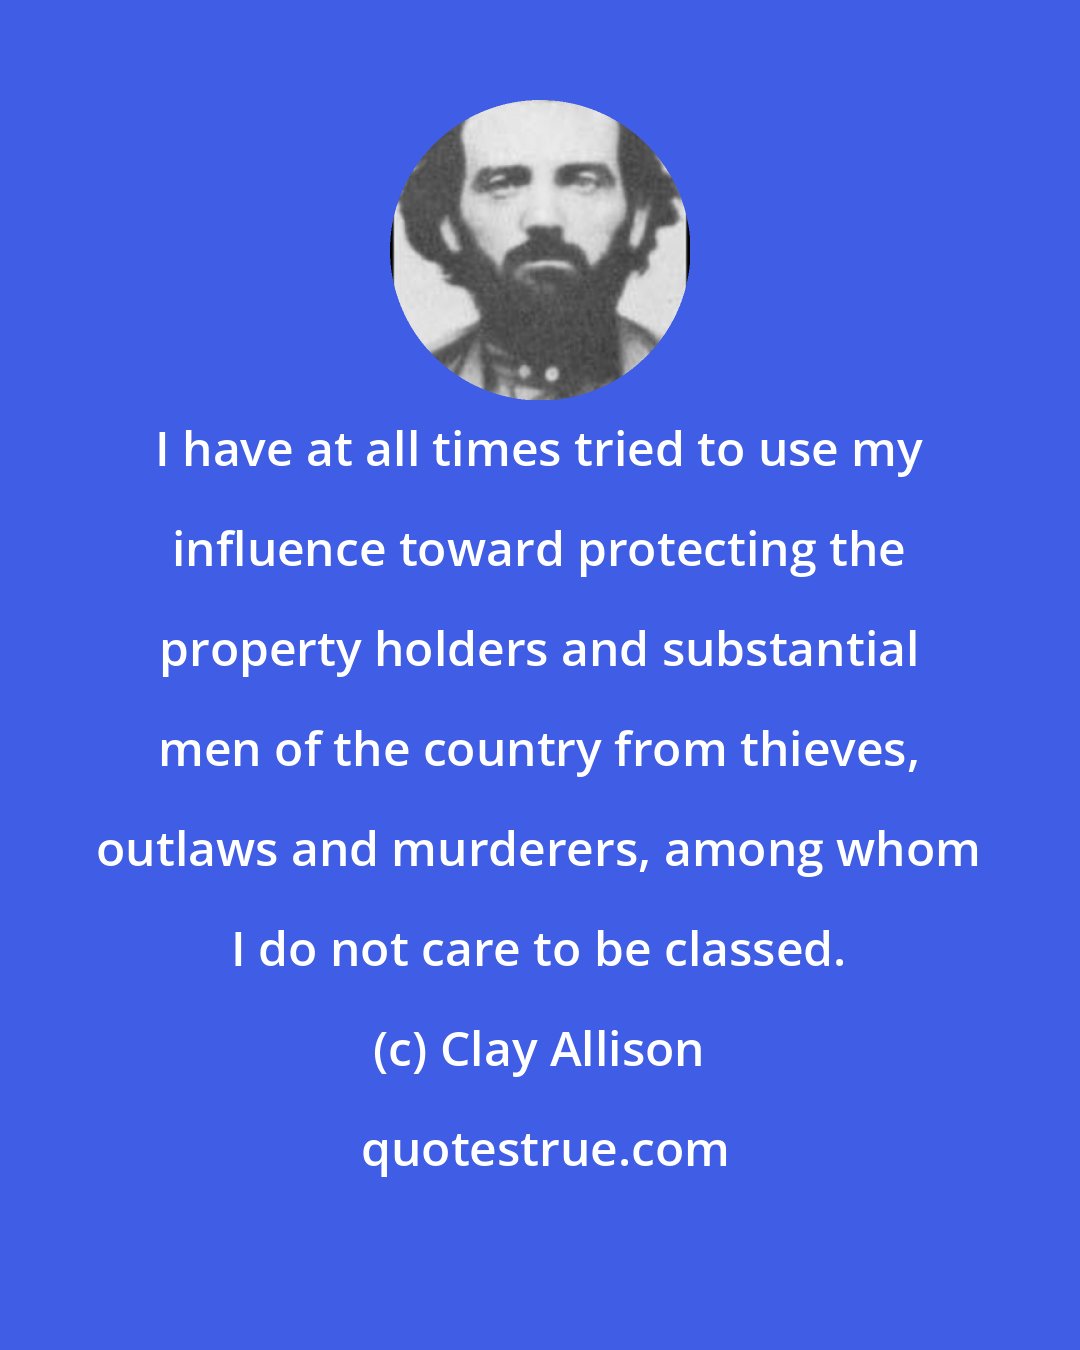 Clay Allison: I have at all times tried to use my influence toward protecting the property holders and substantial men of the country from thieves, outlaws and murderers, among whom I do not care to be classed.